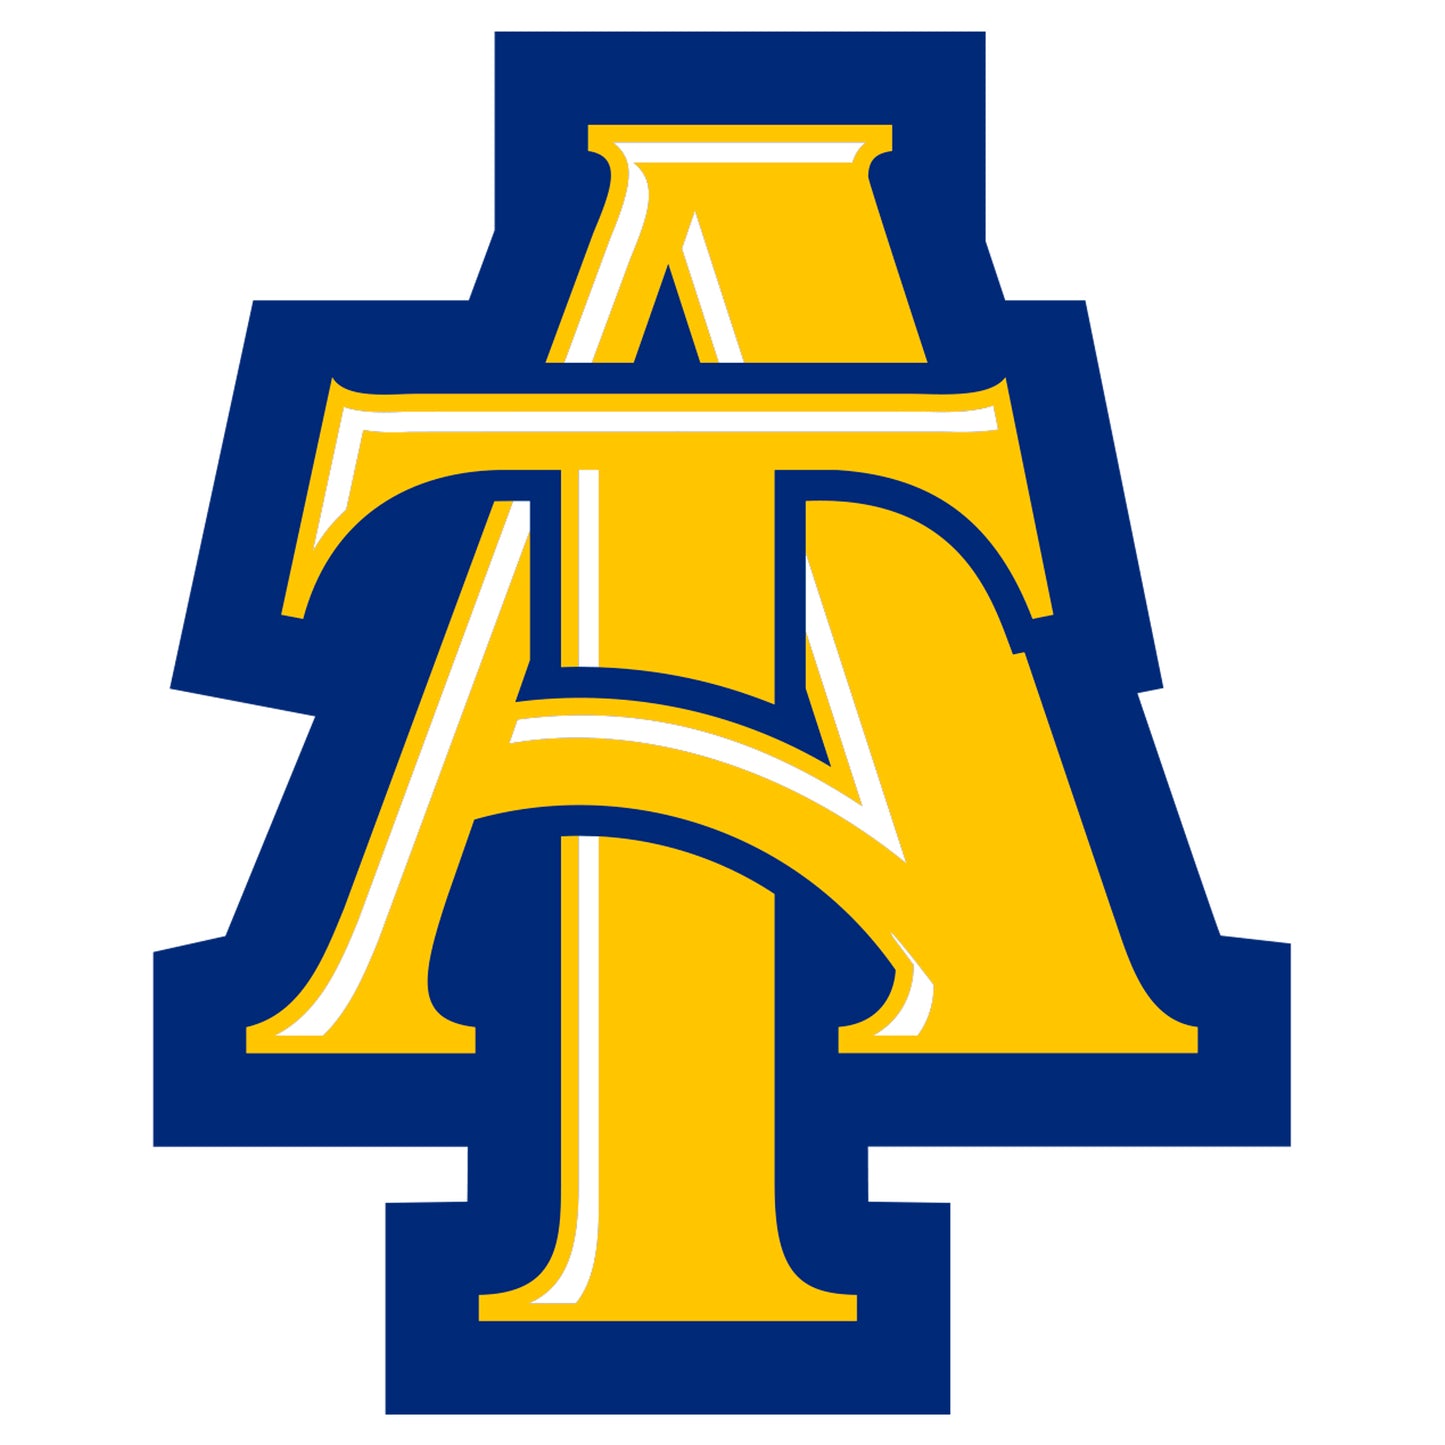 Sheet of 5 -North Carolina A&T State U: North Carolina A&T Aggies  Logo Minis        - Officially Licensed NCAA Removable    Adhesive Decal